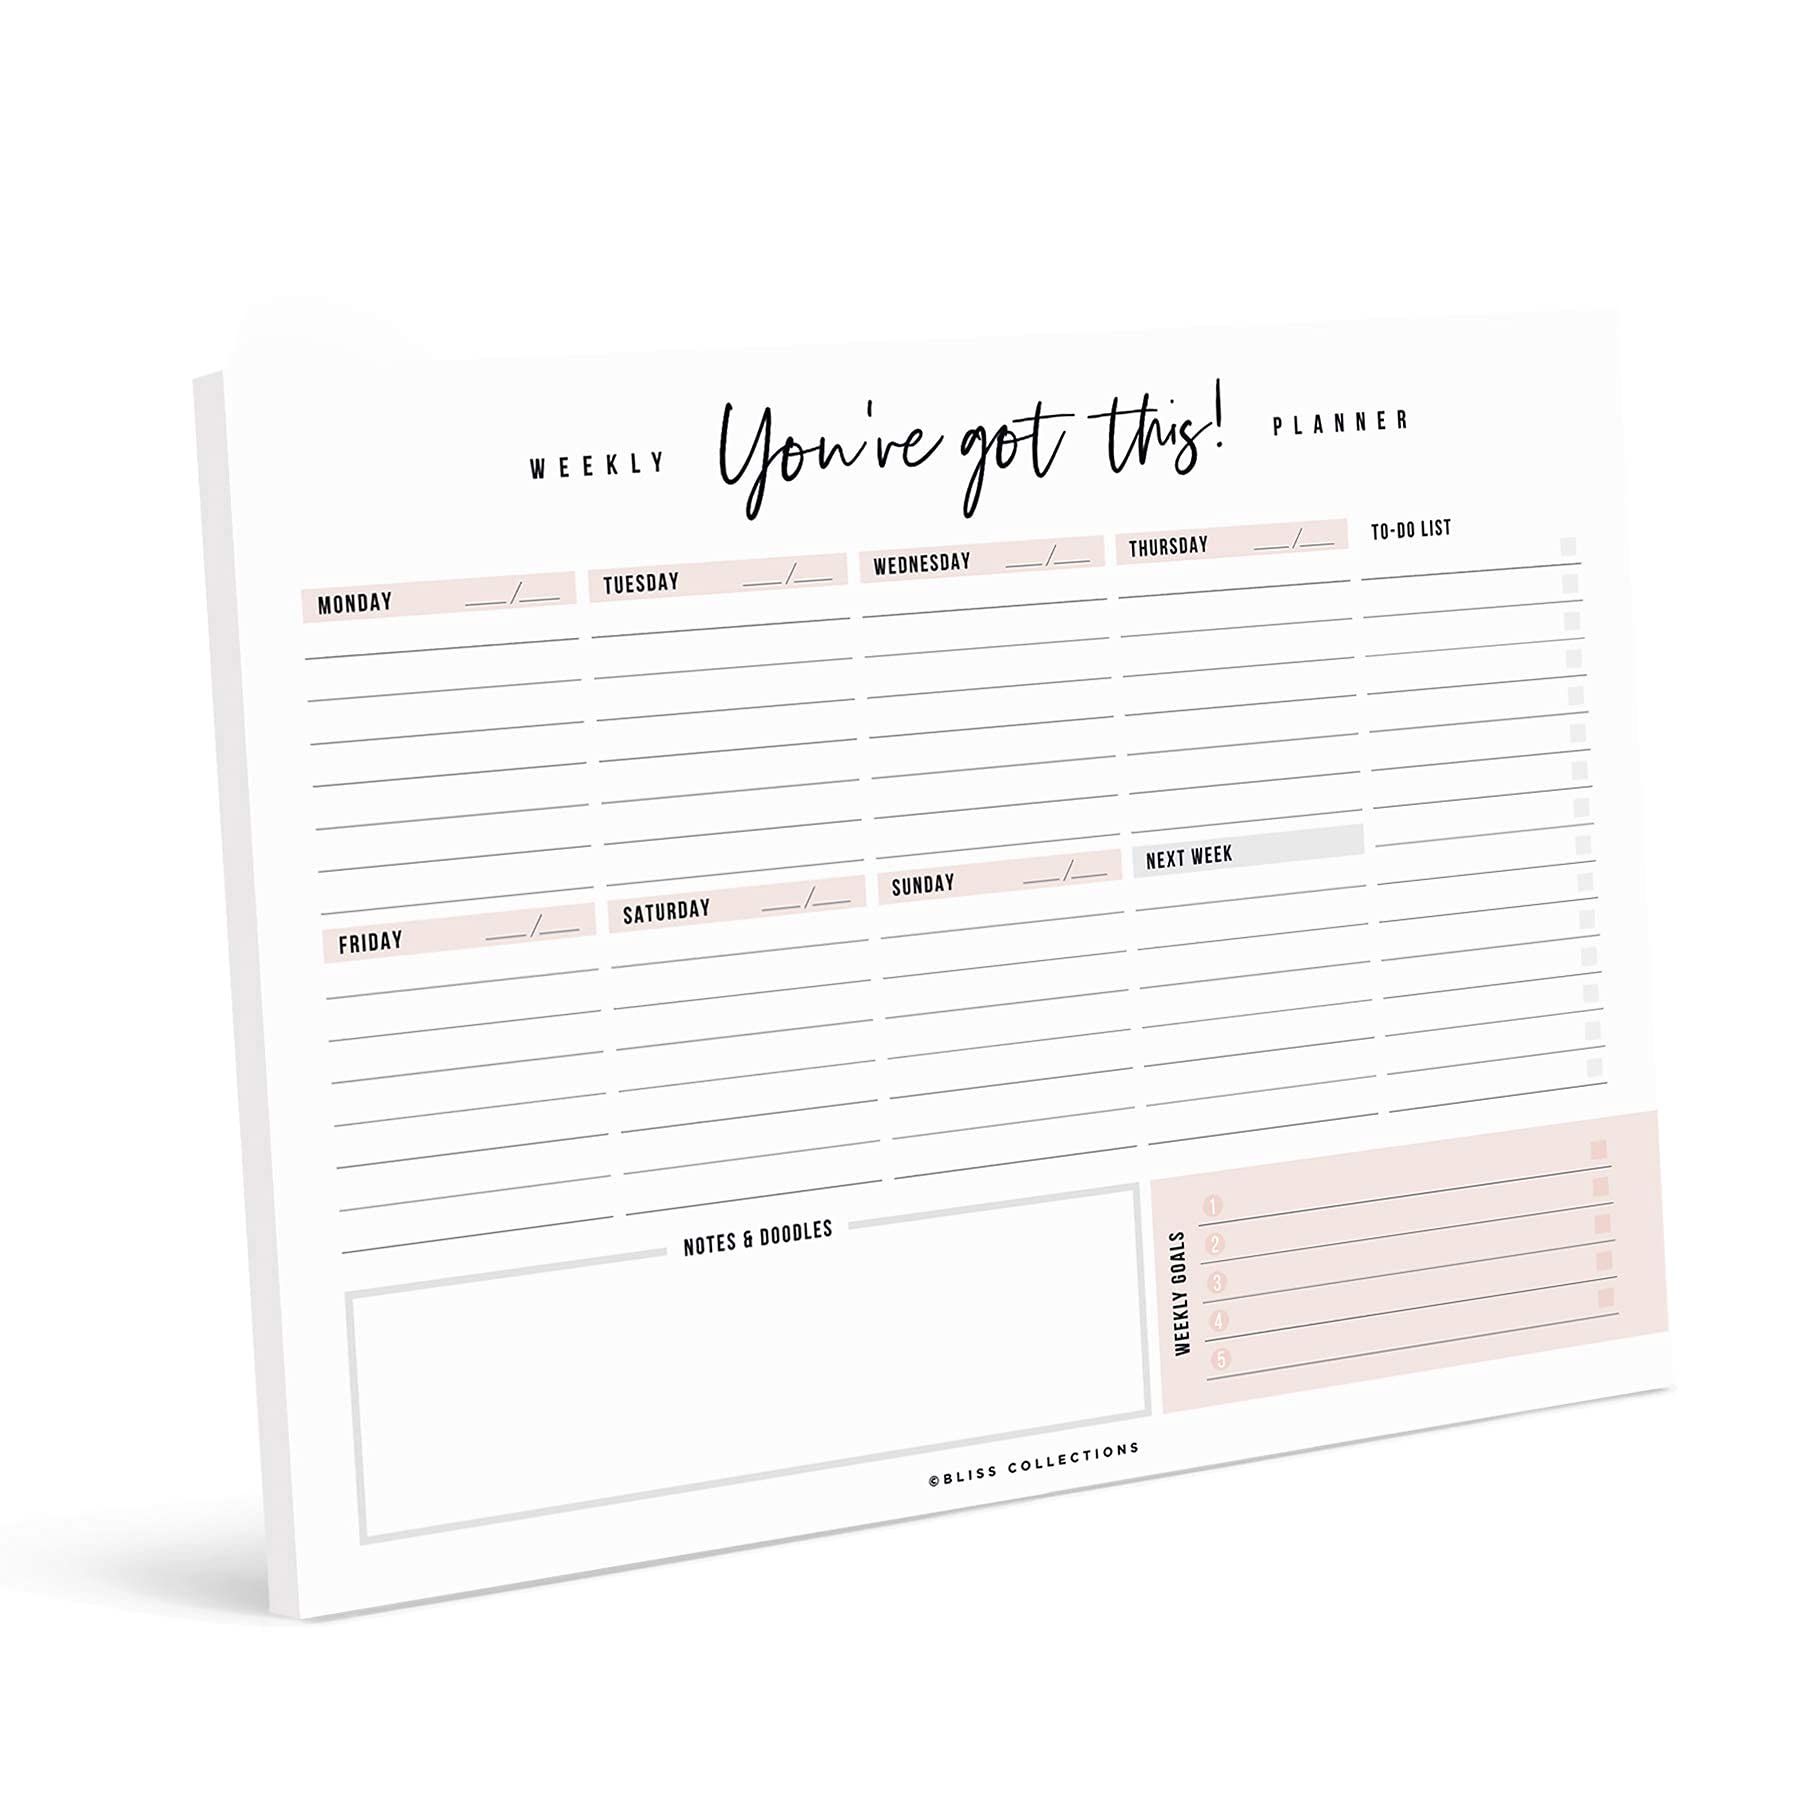 Bliss Collections Weekly Planner 8.5x11 with 50 Undated Tear-Off Sheets, You've Got This Calendar, O | Amazon (US)